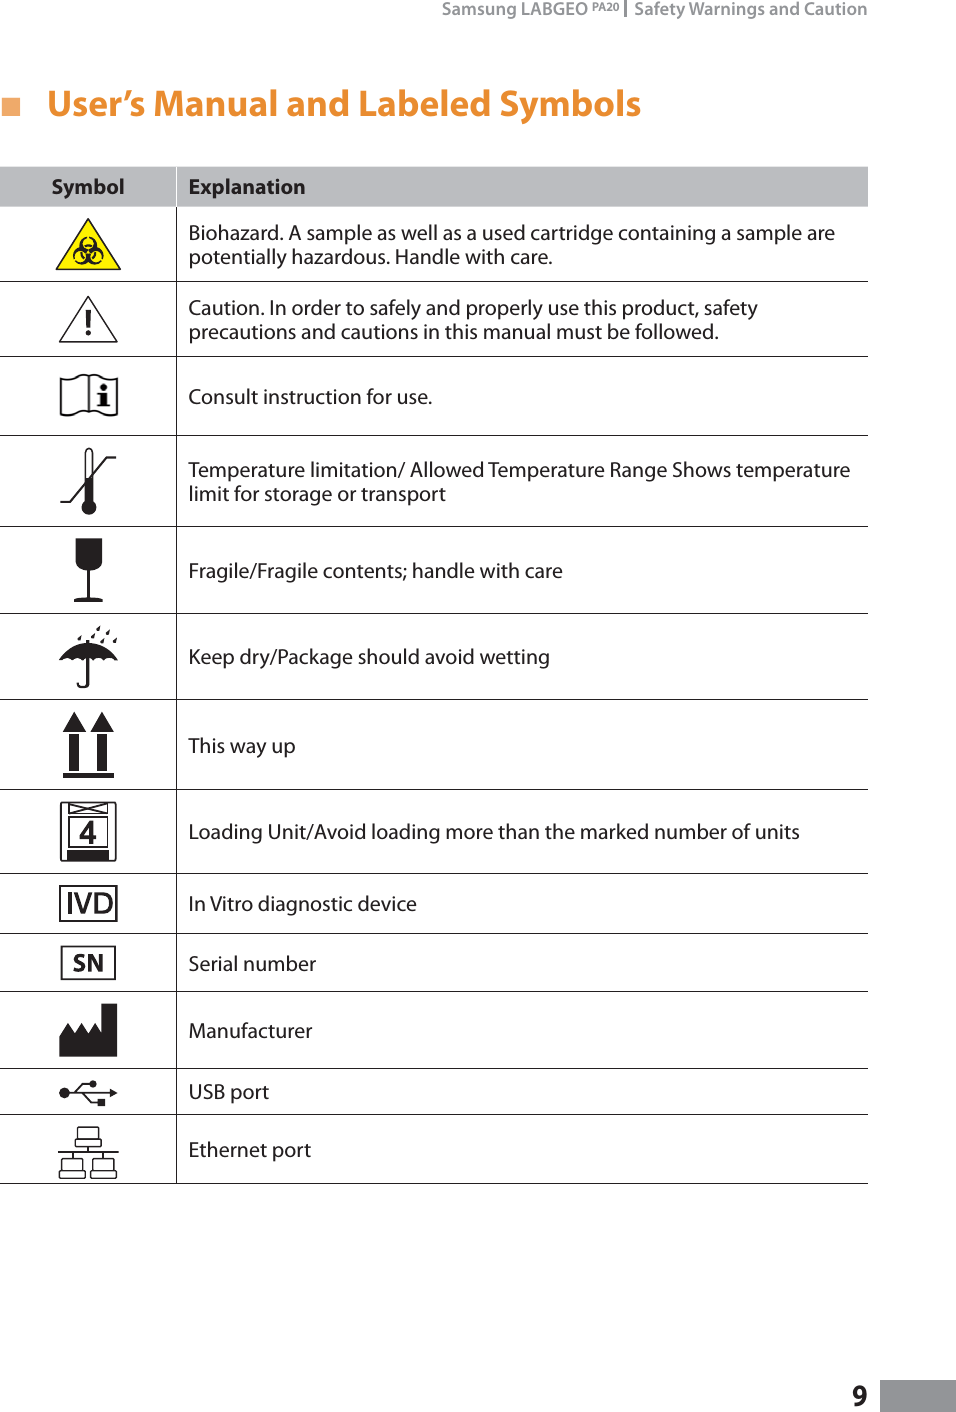 9Samsung LABGEO PA20    Safety Warnings and Caution ŶUser’s Manual and Labeled SymbolsSymbol ExplanationBiohazard. A sample as well as a used cartridge containing a sample are potentially hazardous. Handle with care.Caution. In order to safely and properly use this product, safety precautions and cautions in this manual must be followed.Consult instruction for use.Temperature limitation/ Allowed Temperature Range Shows temperature limit for storage or transportFragile/Fragile contents; handle with careKeep dry/Package should avoid wettingThis way upLoading Unit/Avoid loading more than the marked number of unitsIn Vitro diagnostic deviceSerial numberManufacturerUSB portEthernet port